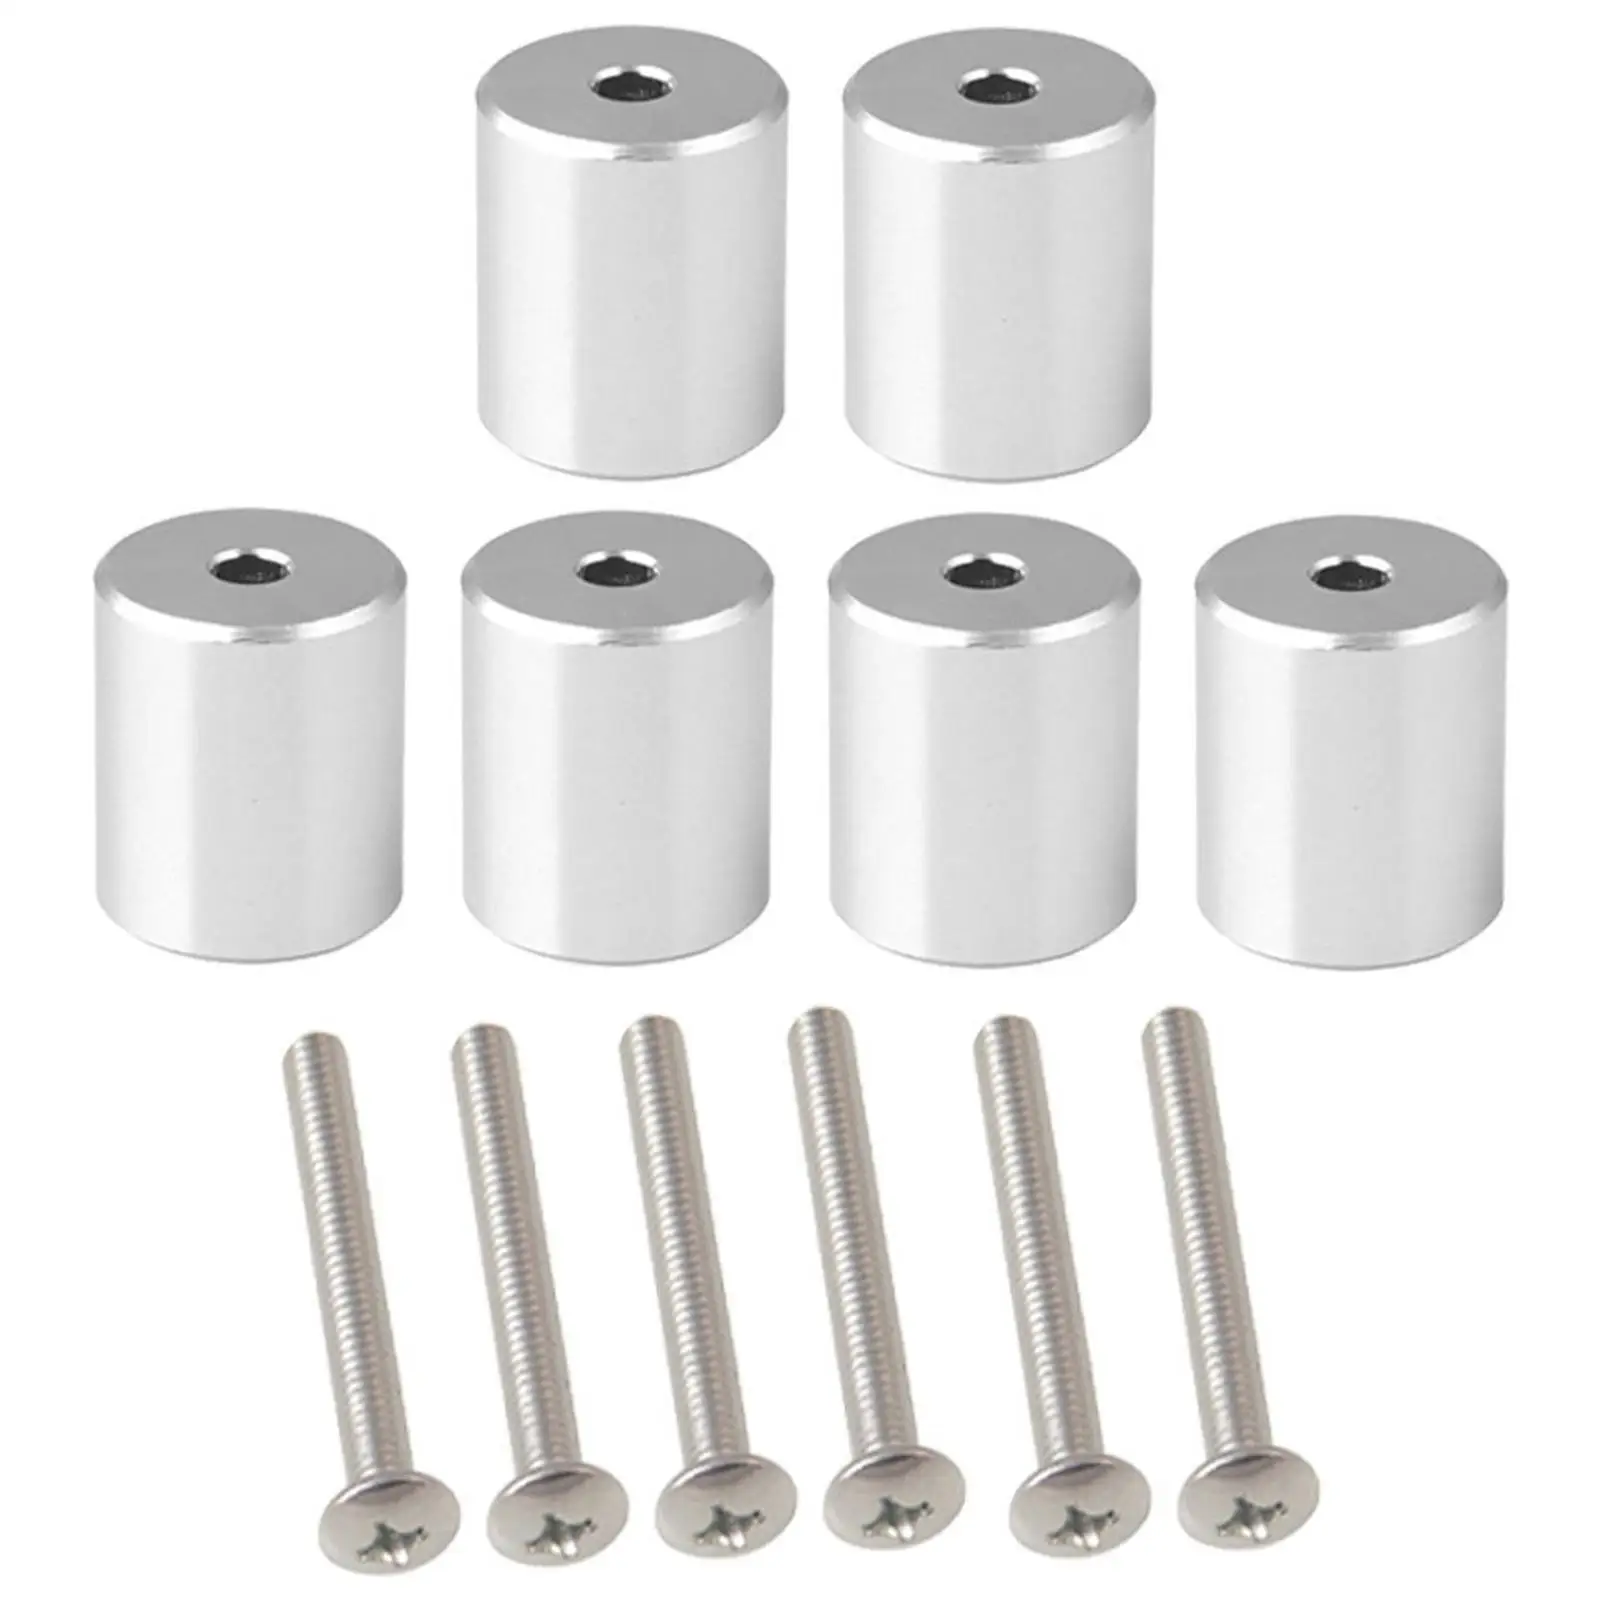 6 Pieces Roof Rack Mounting Tube with 6 Pieces Nuts   Silver Kct005-6 Replacement Mounting Fitting Kit for Vehicle